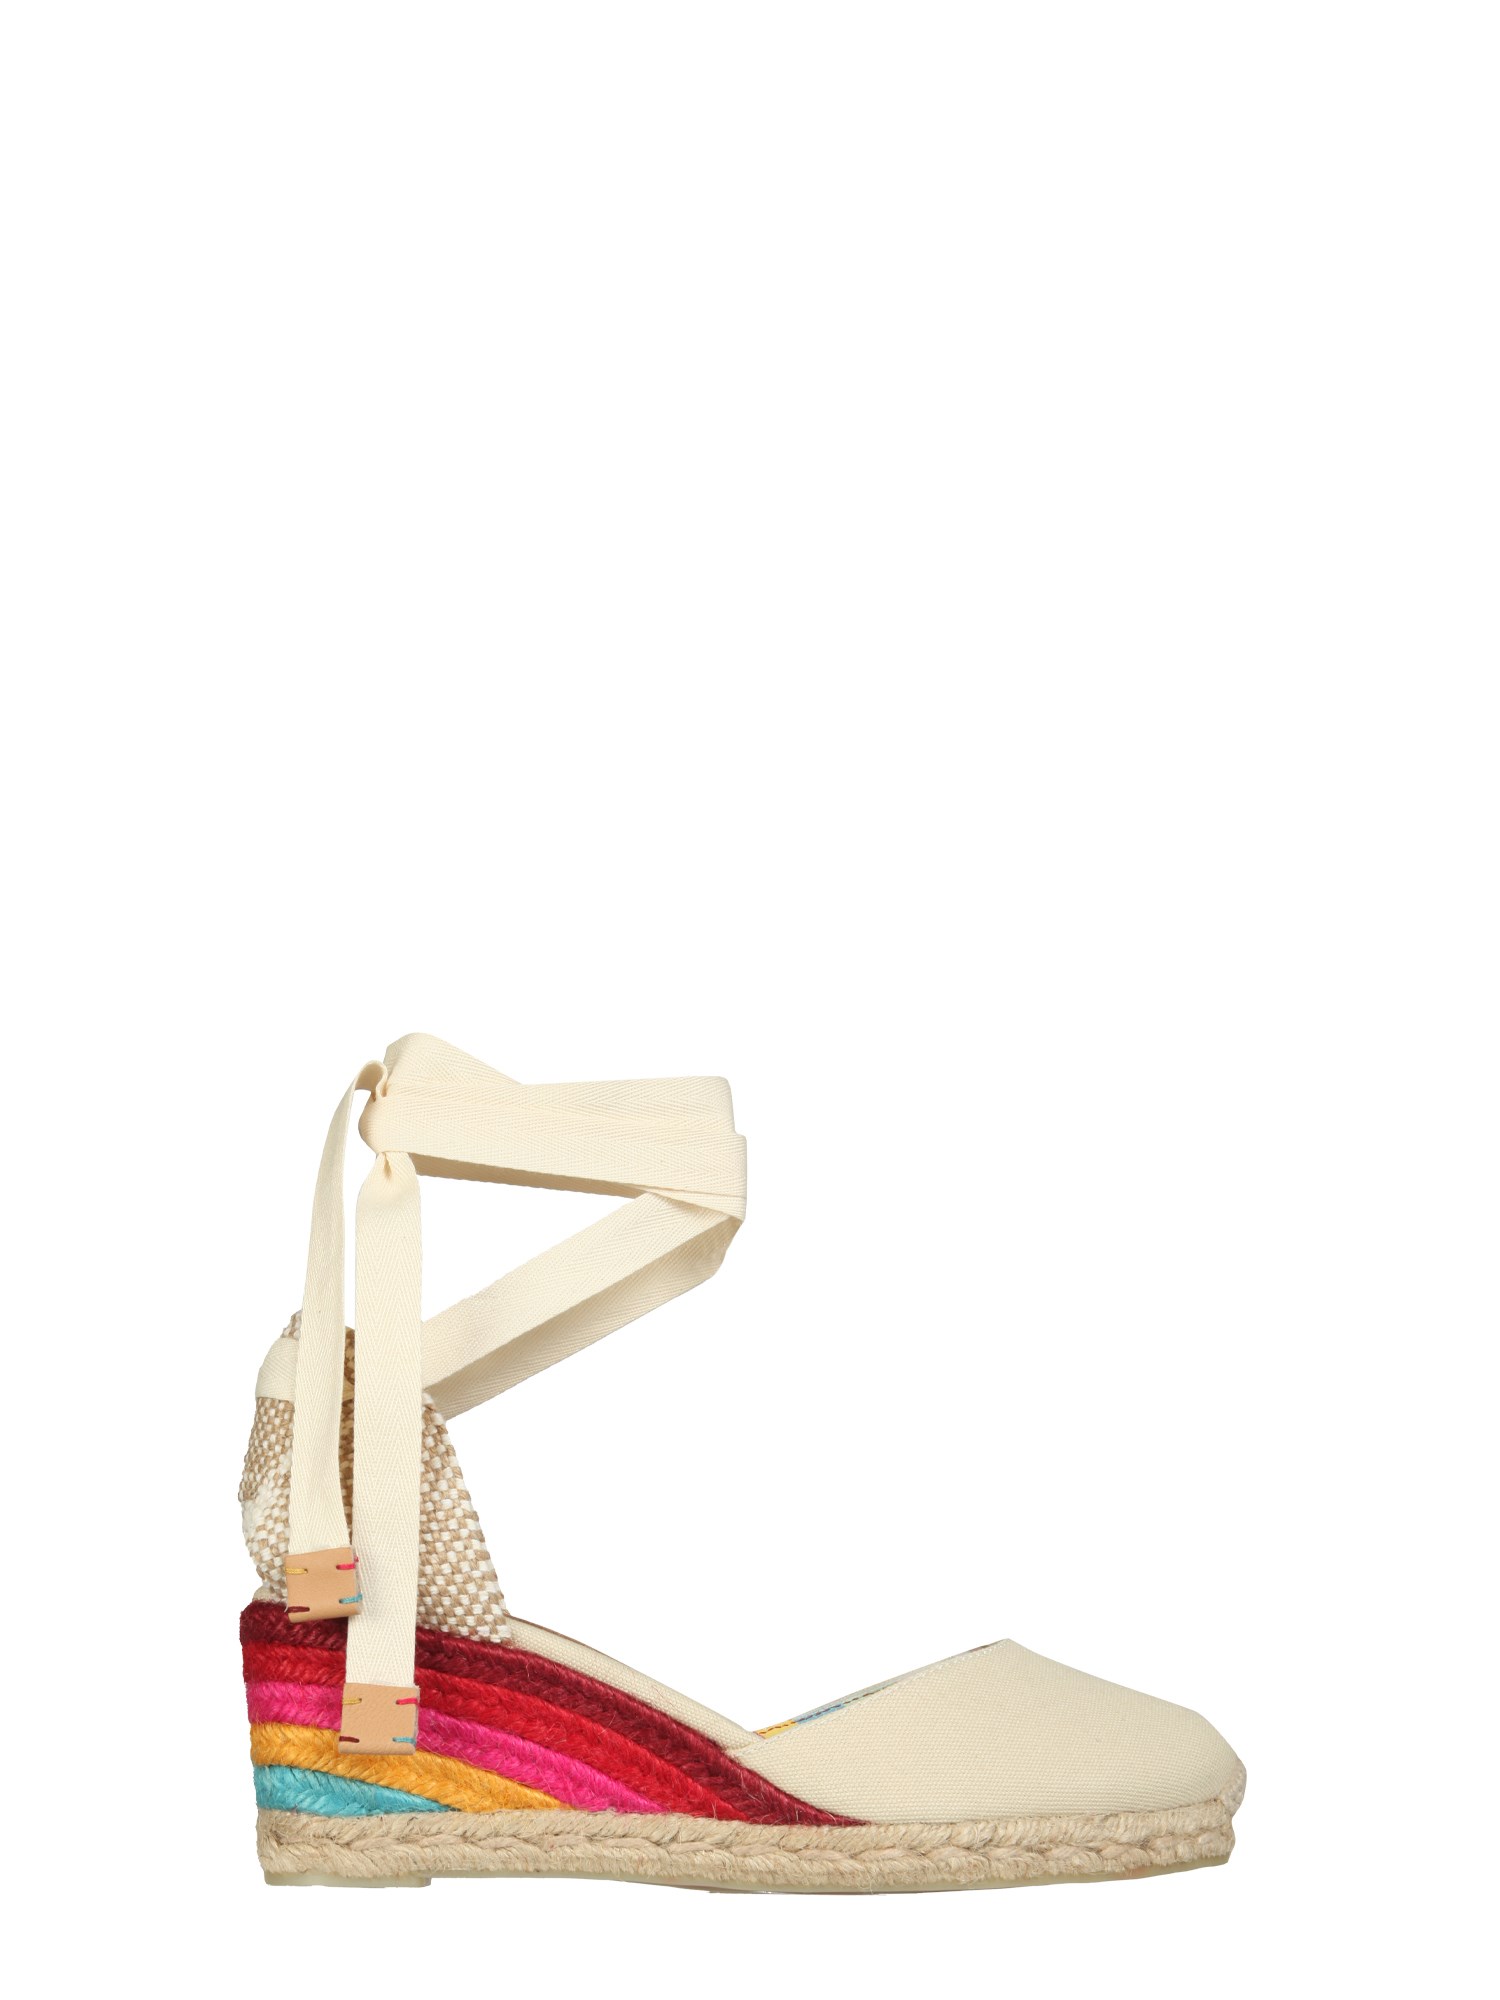 Castaner By Paul Smith "CARINA" WEDGE ESPADRILLES